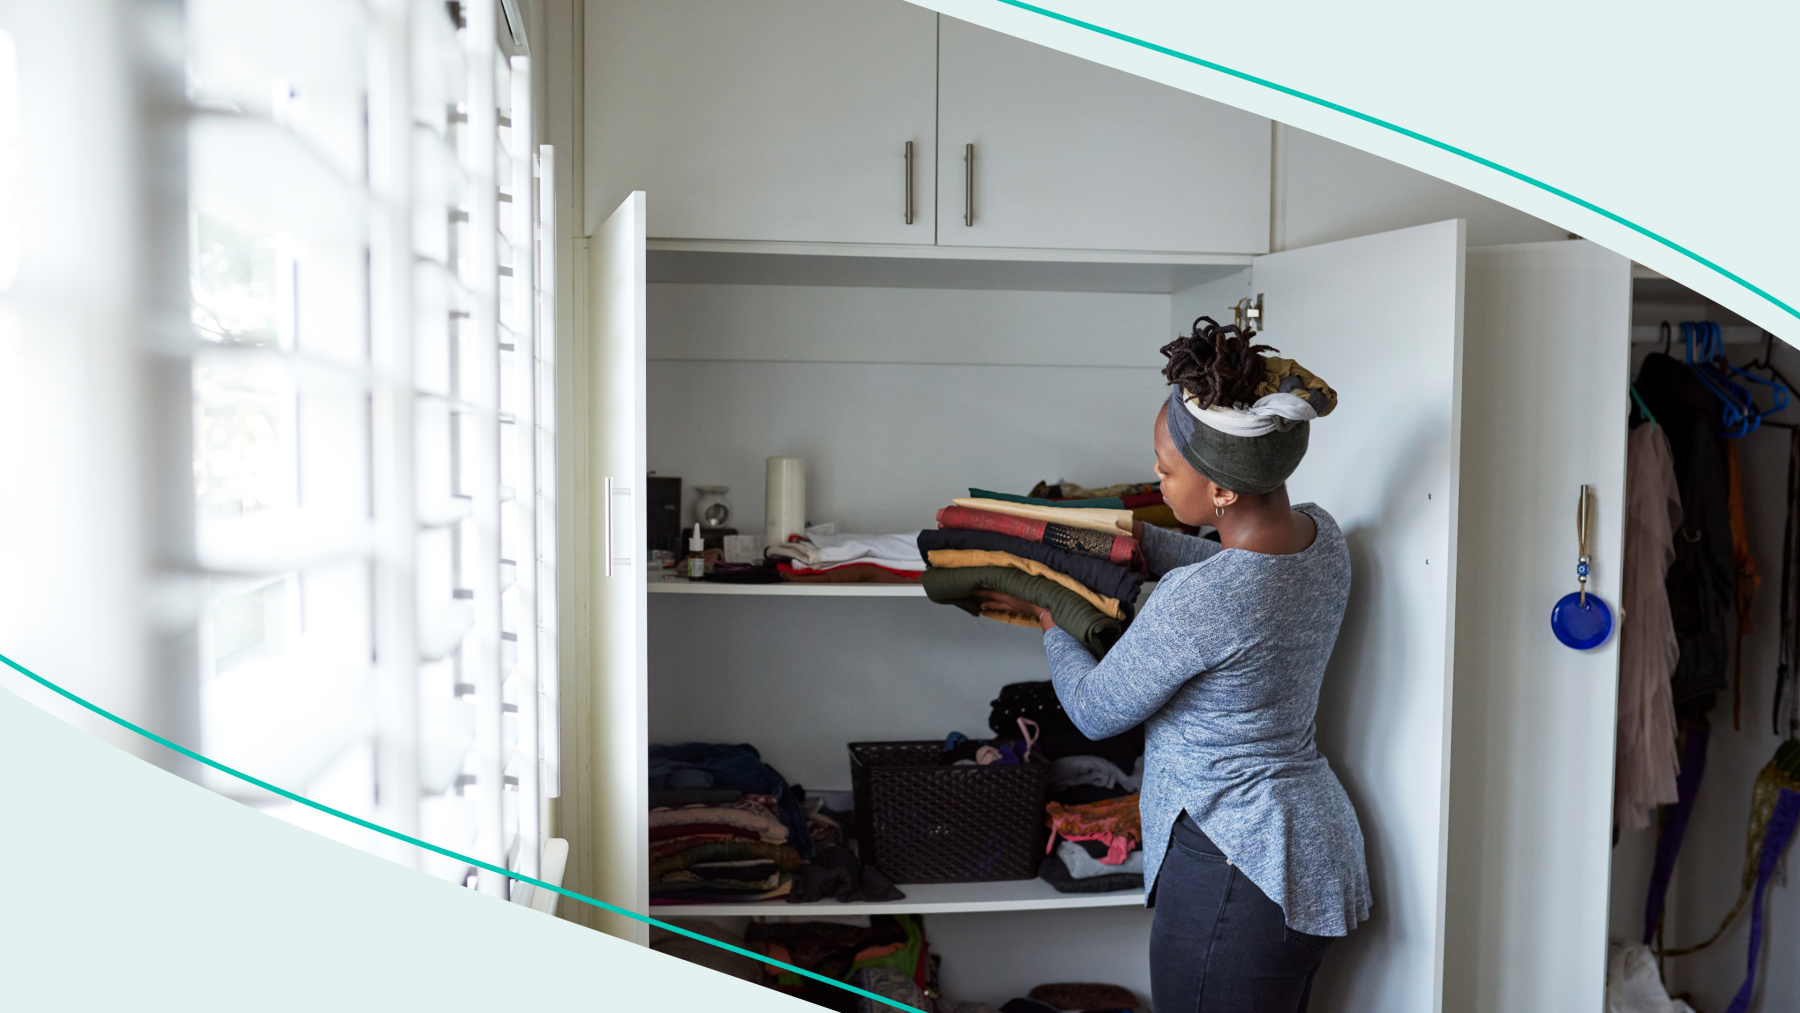 Women putting clothes in closet with teal graphic